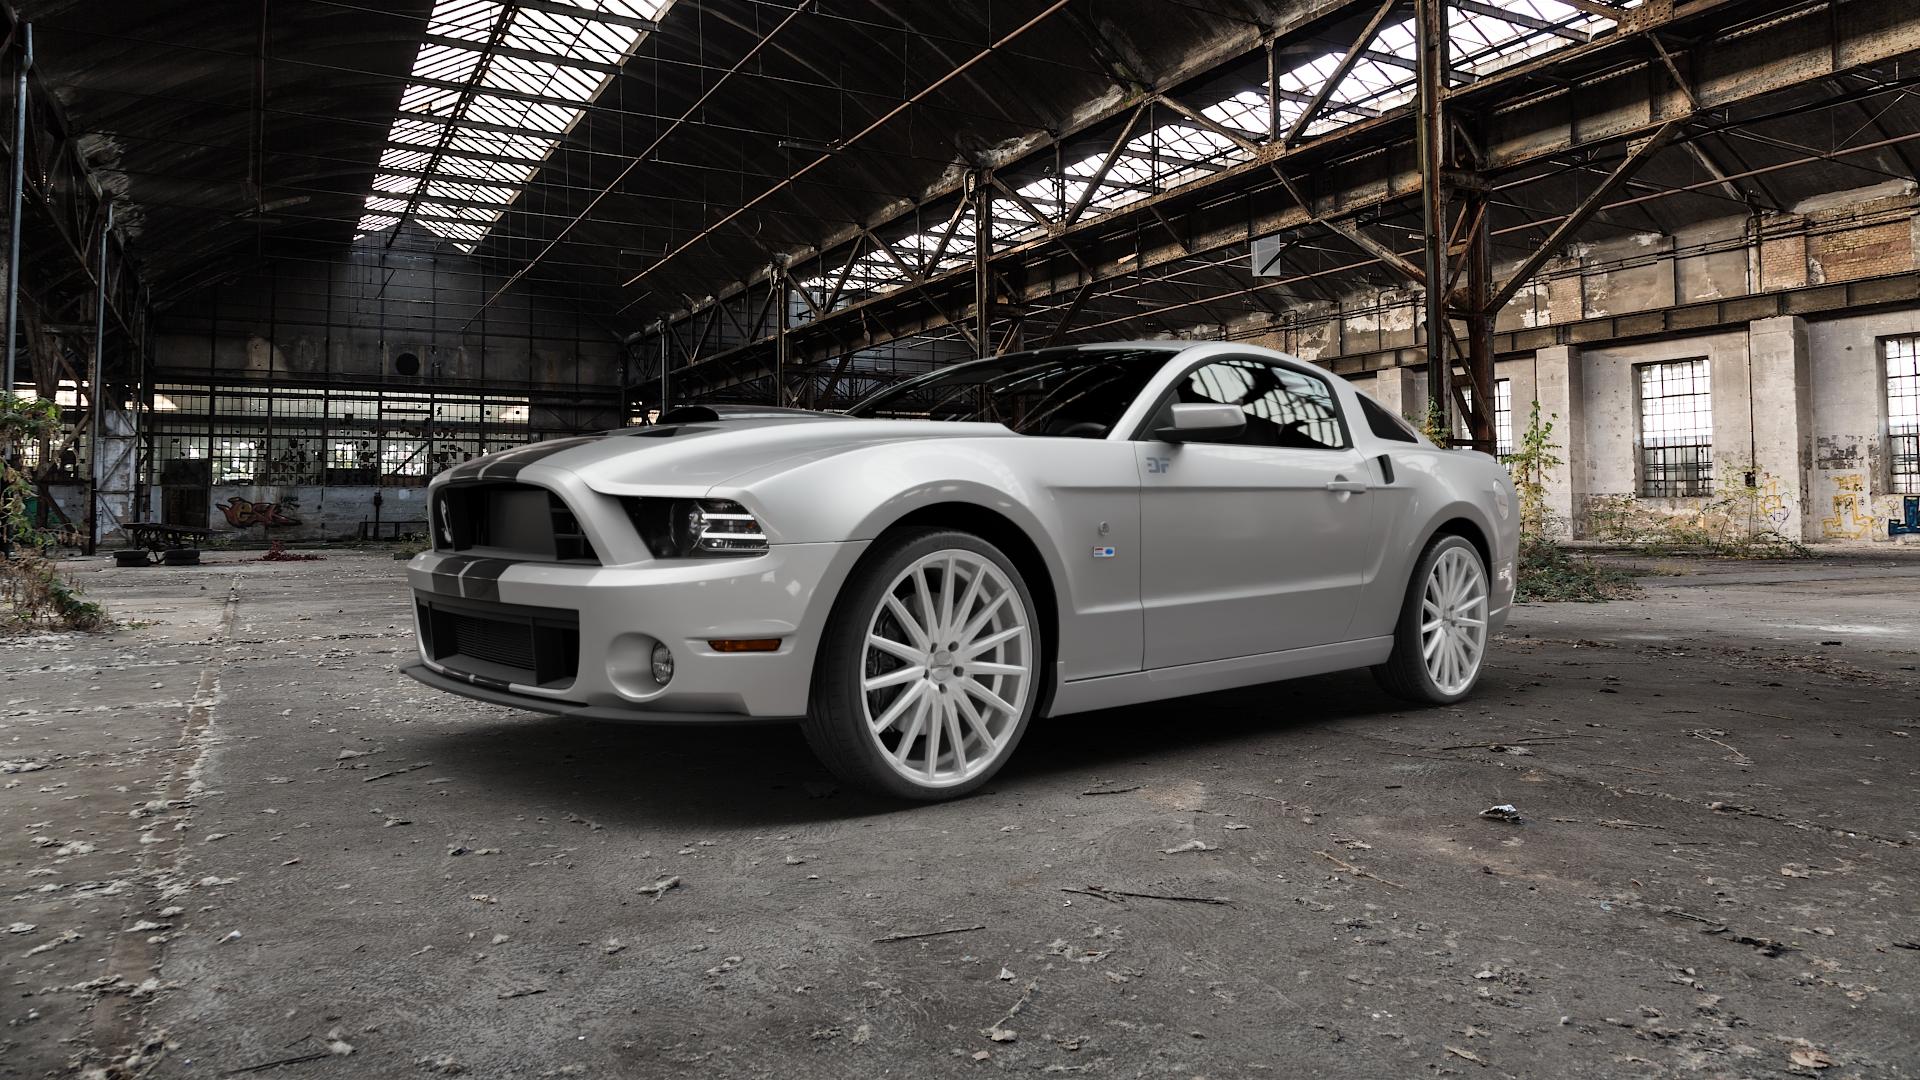 Vossen VFS2 Flat Face Silver Polished Felge mit Reifen silber in 21Zoll Alufelge auf silbernem Ford Mustang V Coupe ⬇️ mit 15mm Tieferlegung ⬇️ Old Industrial Hall_max5000mm_2022 Frontansicht_1